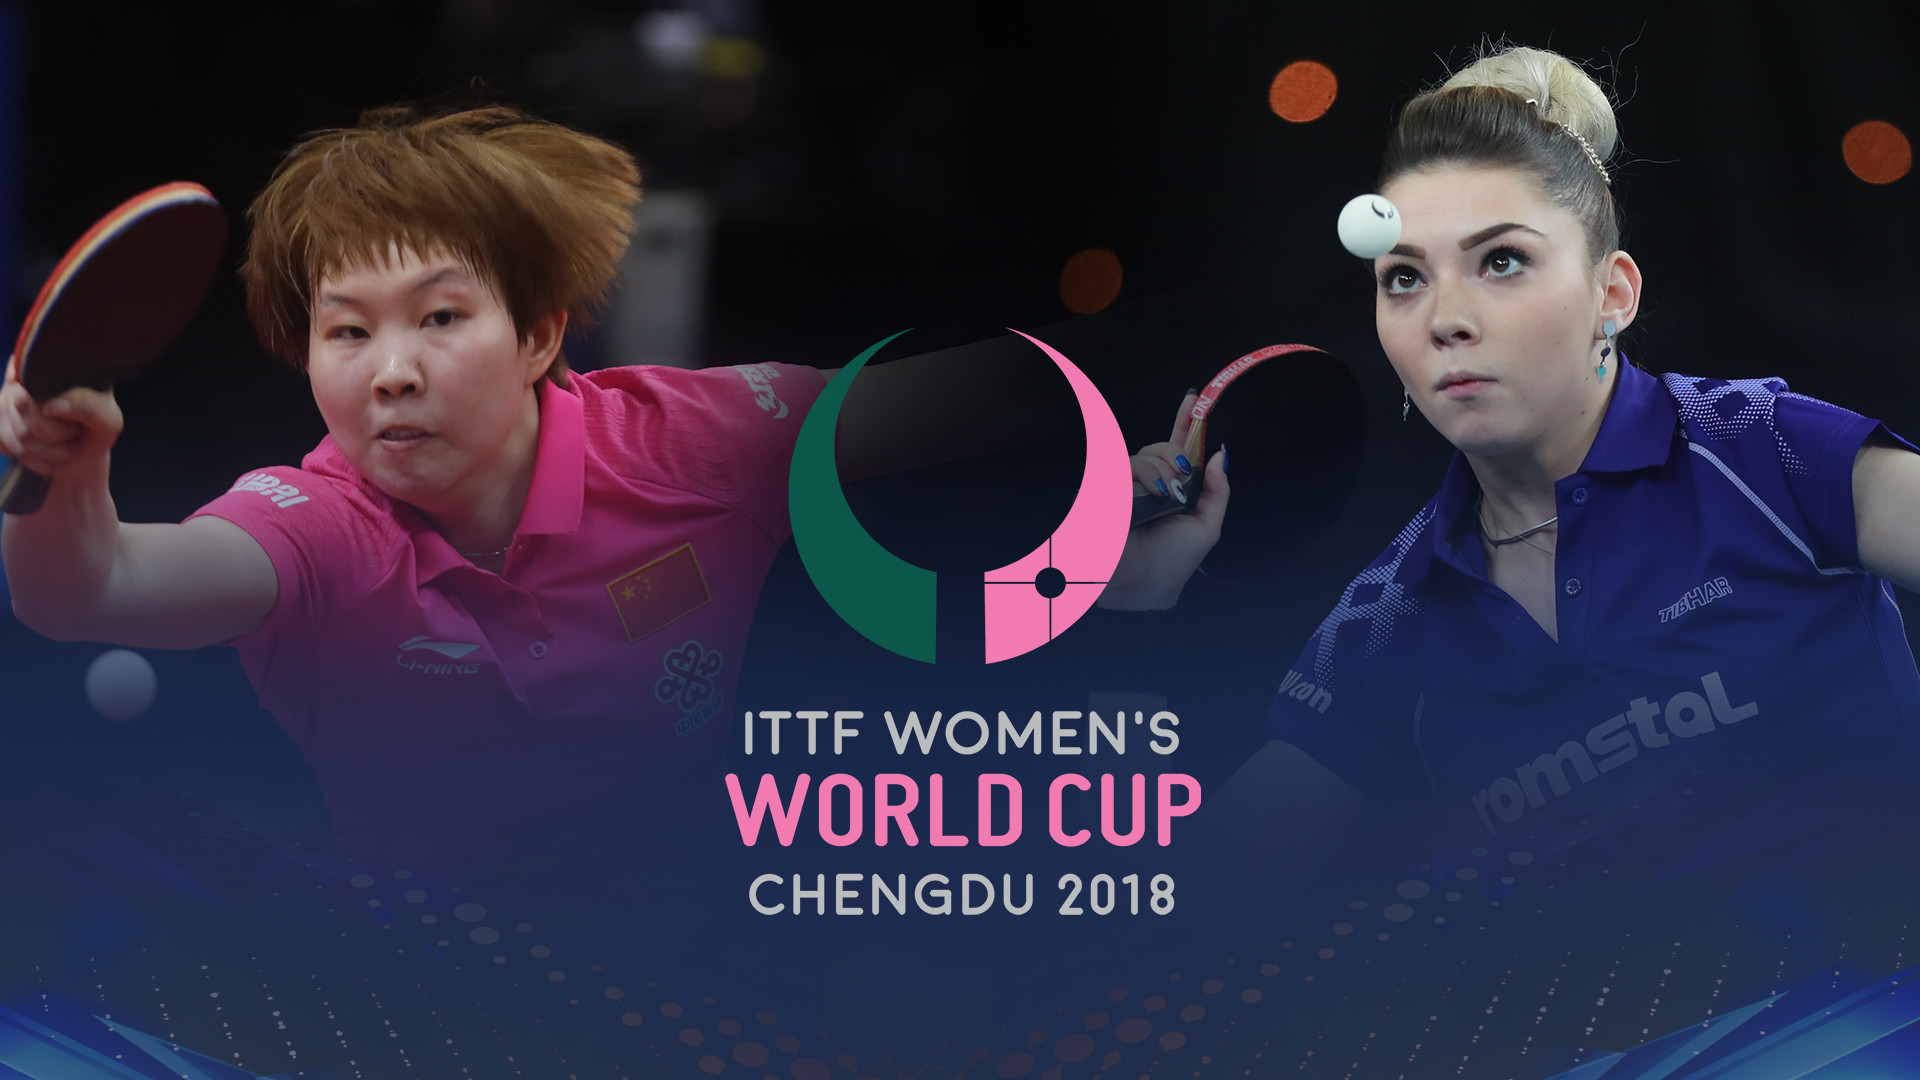 China's world number one Zhu Yuling faces a challenging task if she is to retain her ITTF Women's World Cup title in her home city of Chengdu over the next three days ©ITTF